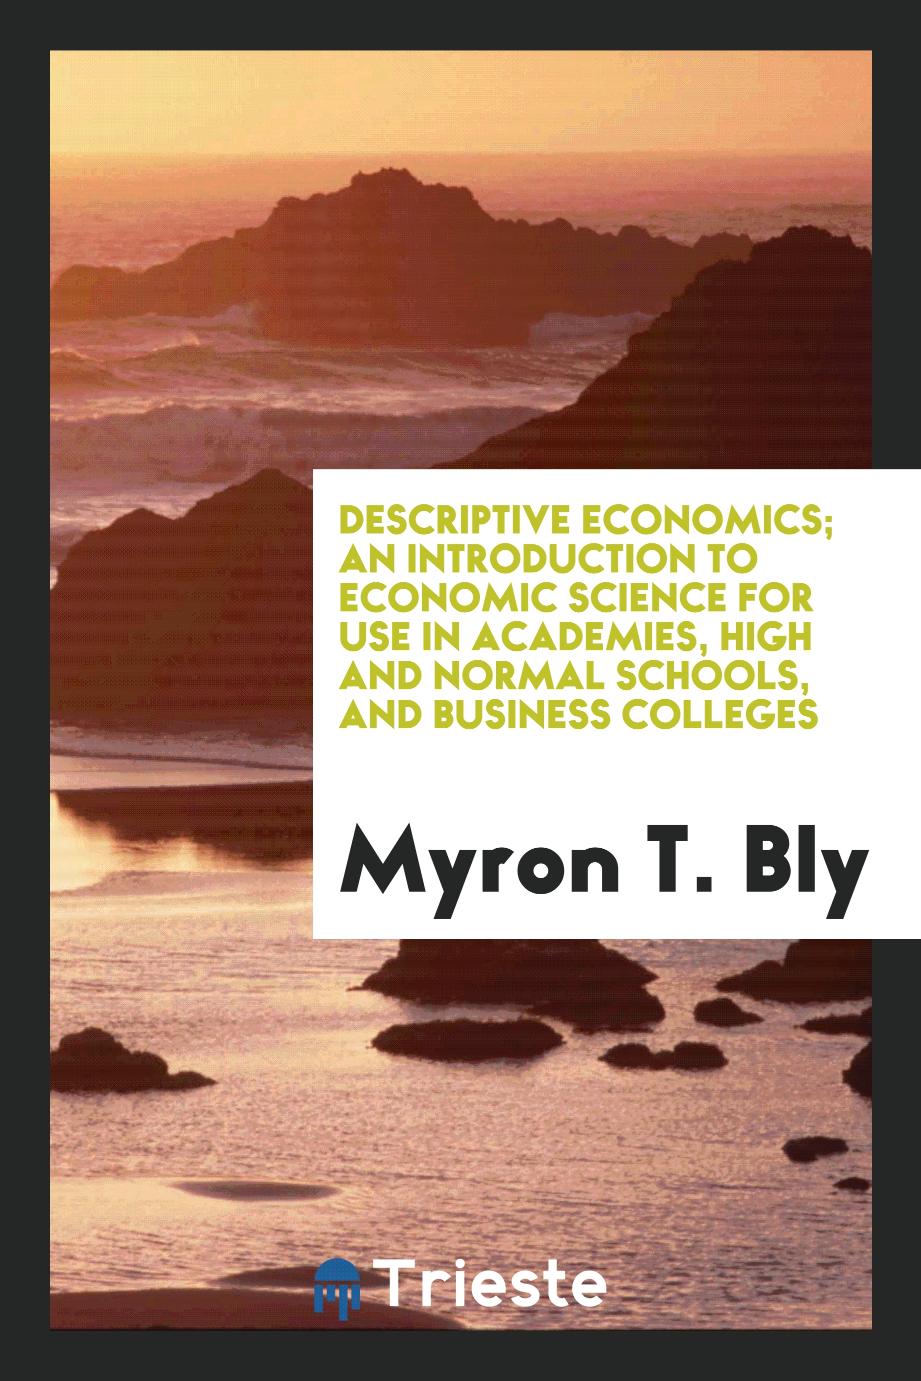 Descriptive economics; an introduction to economic science for use in academies, high and normal schools, and business colleges